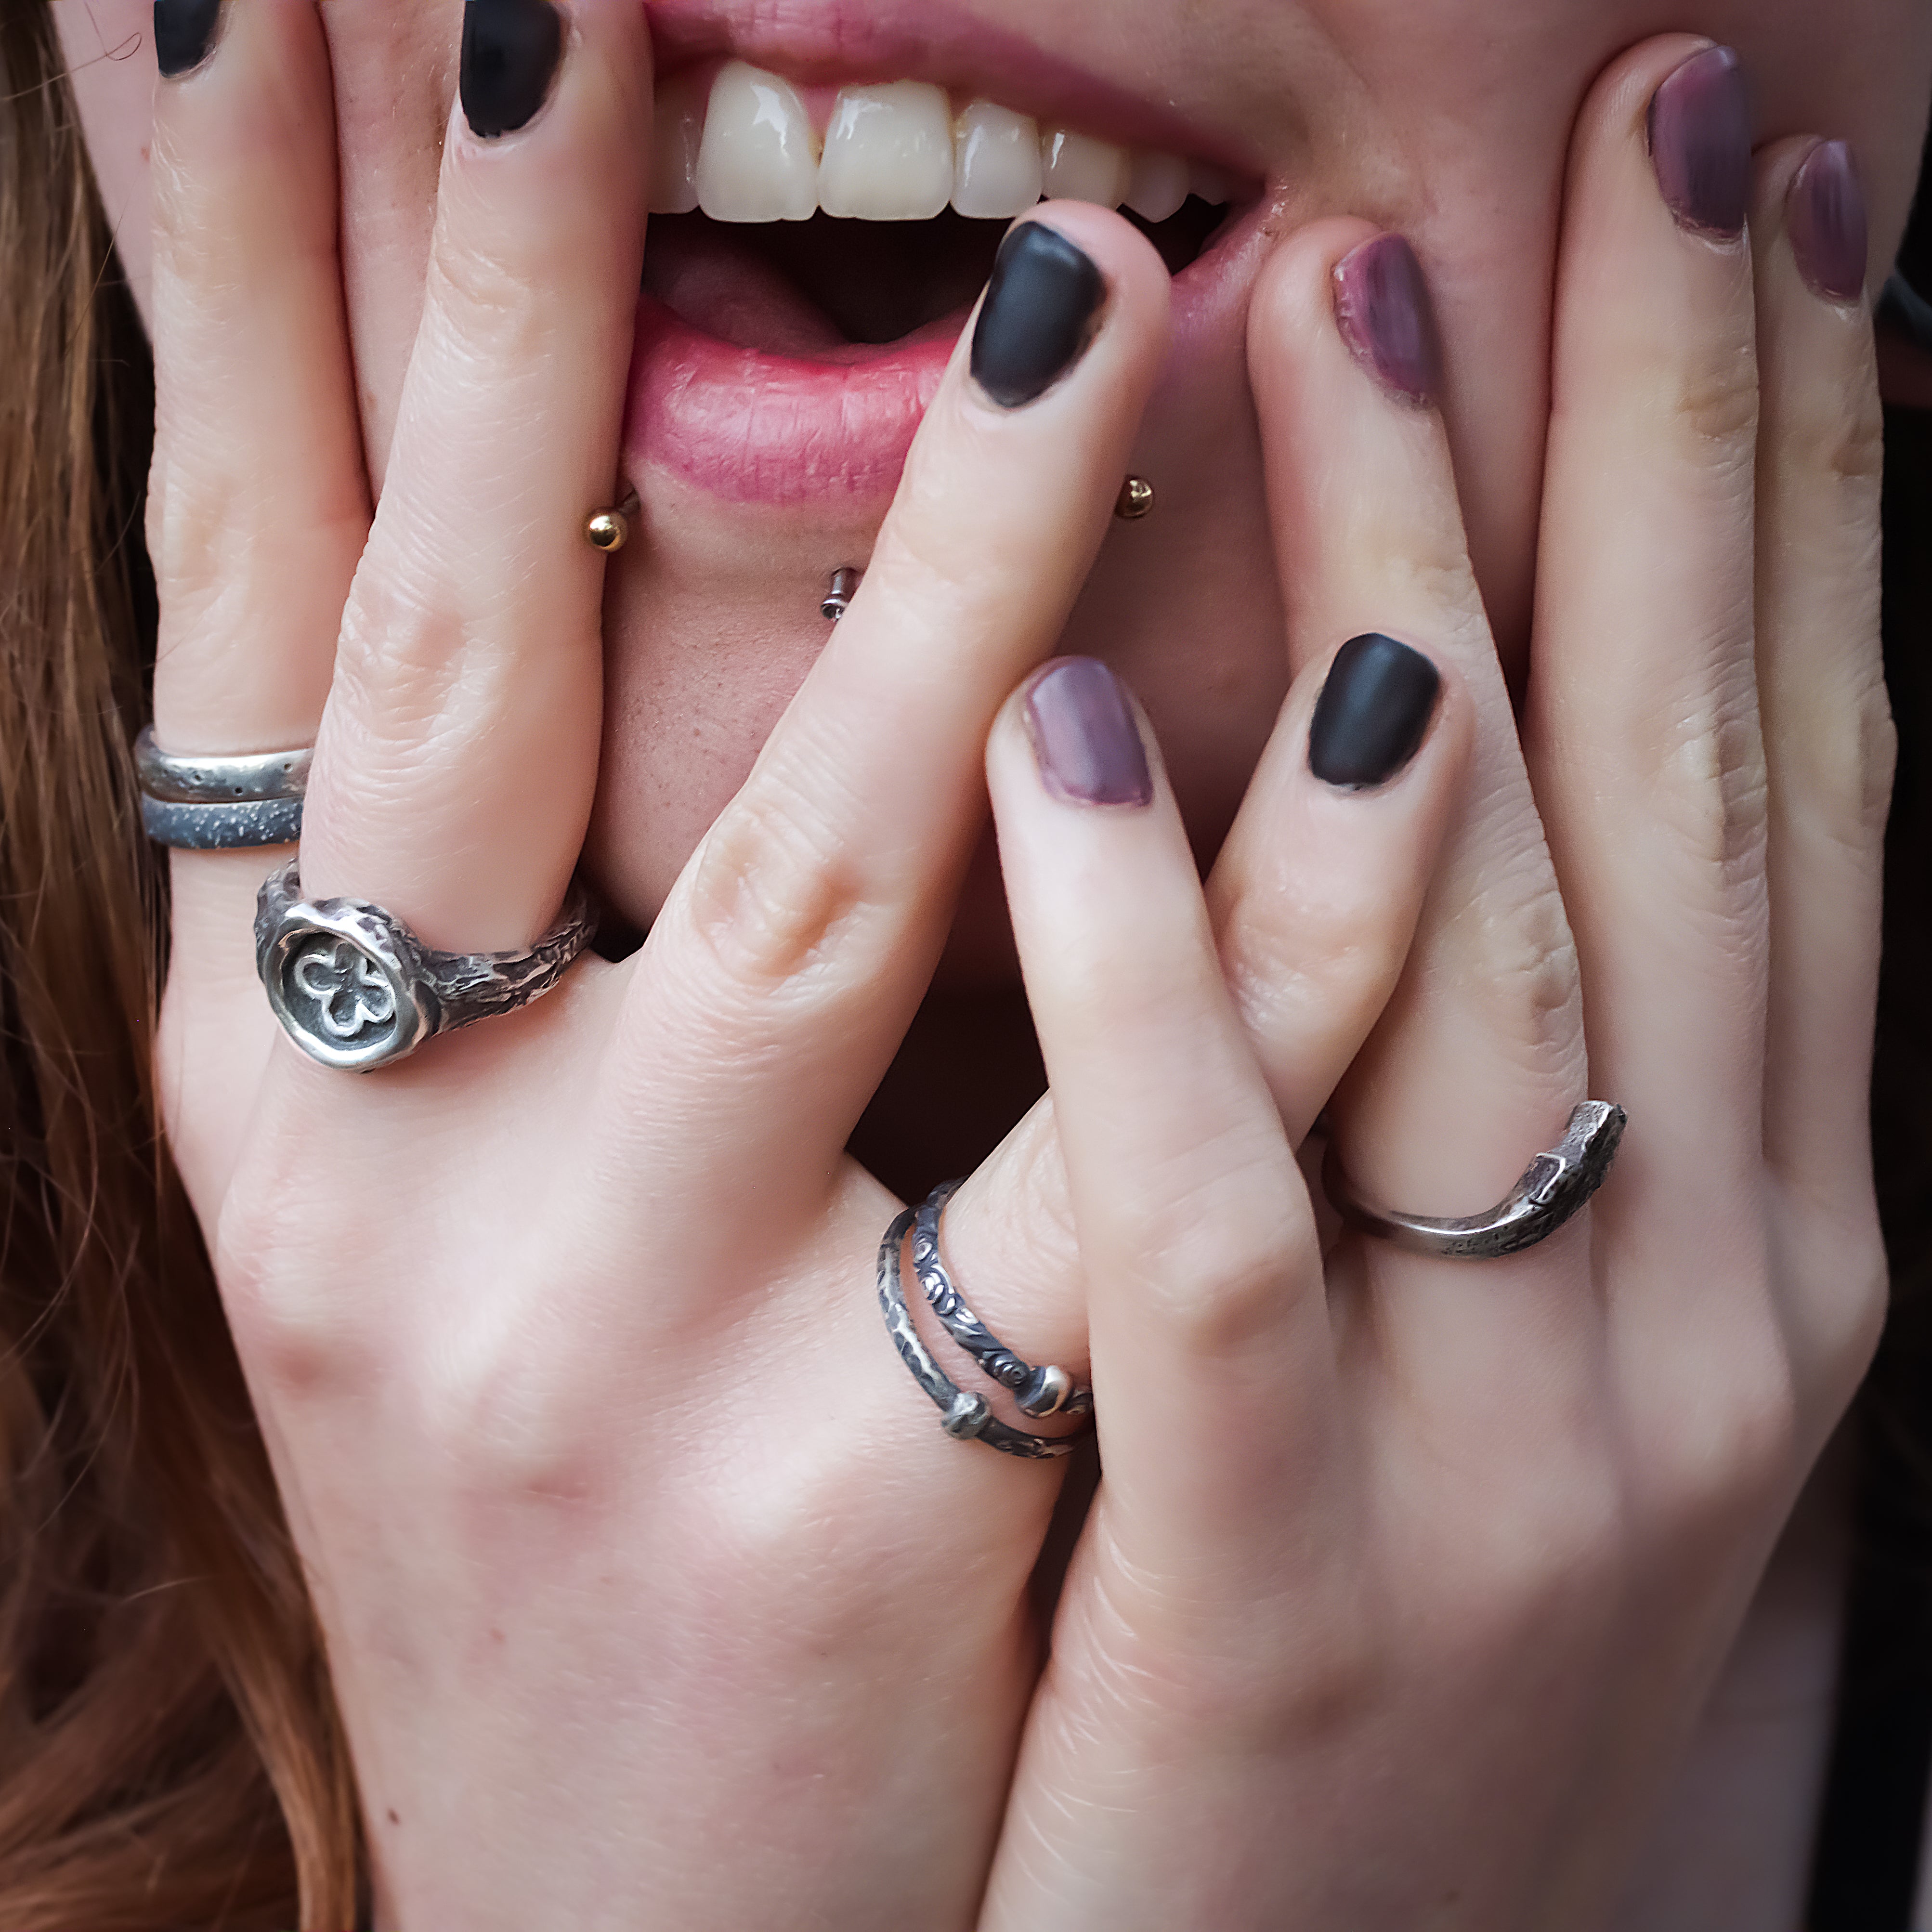 Woman with hands on face while wearing several unique, handmade rings